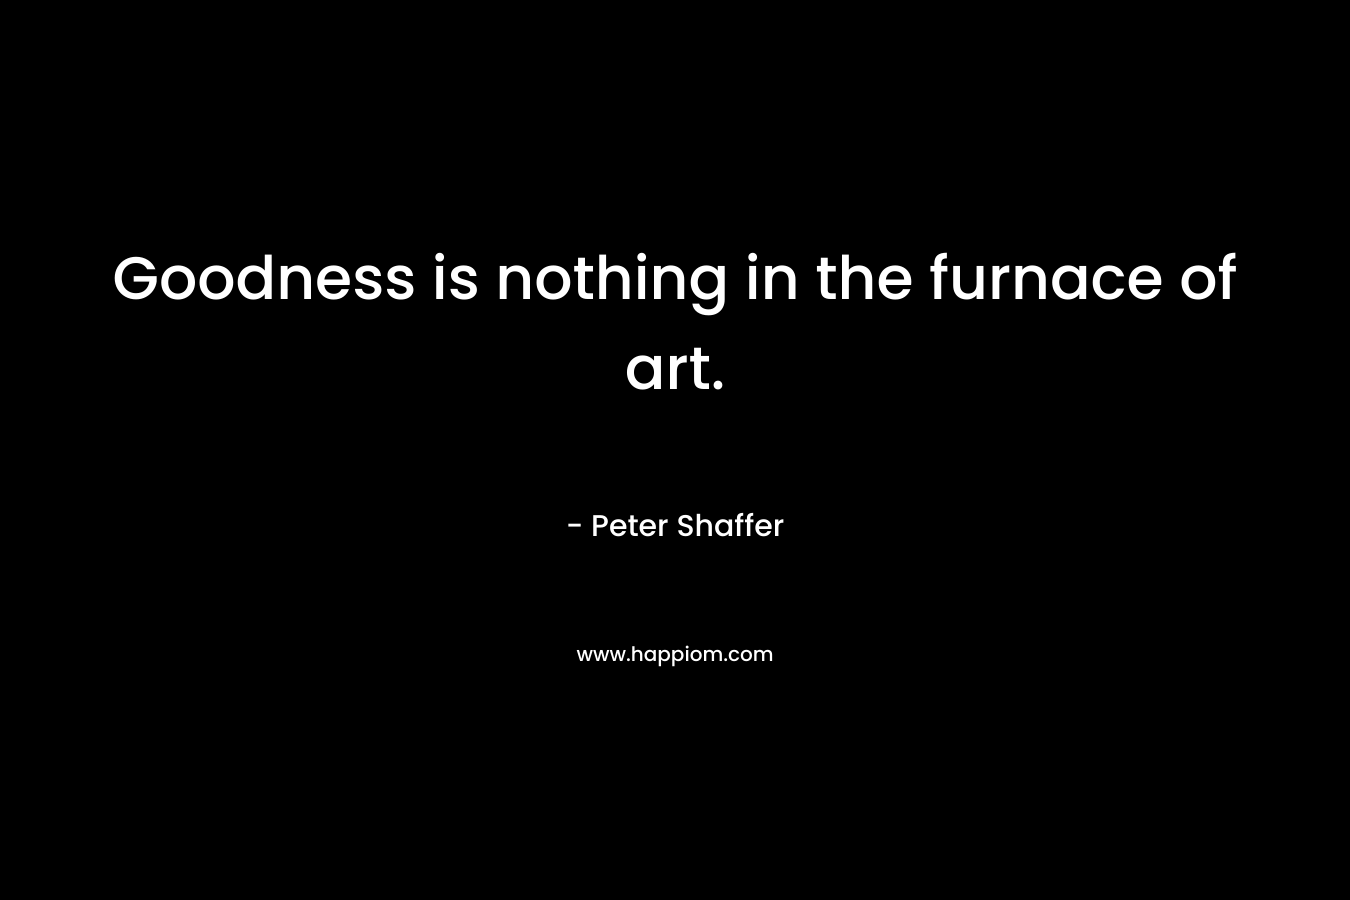 Goodness is nothing in the furnace of art. – Peter Shaffer